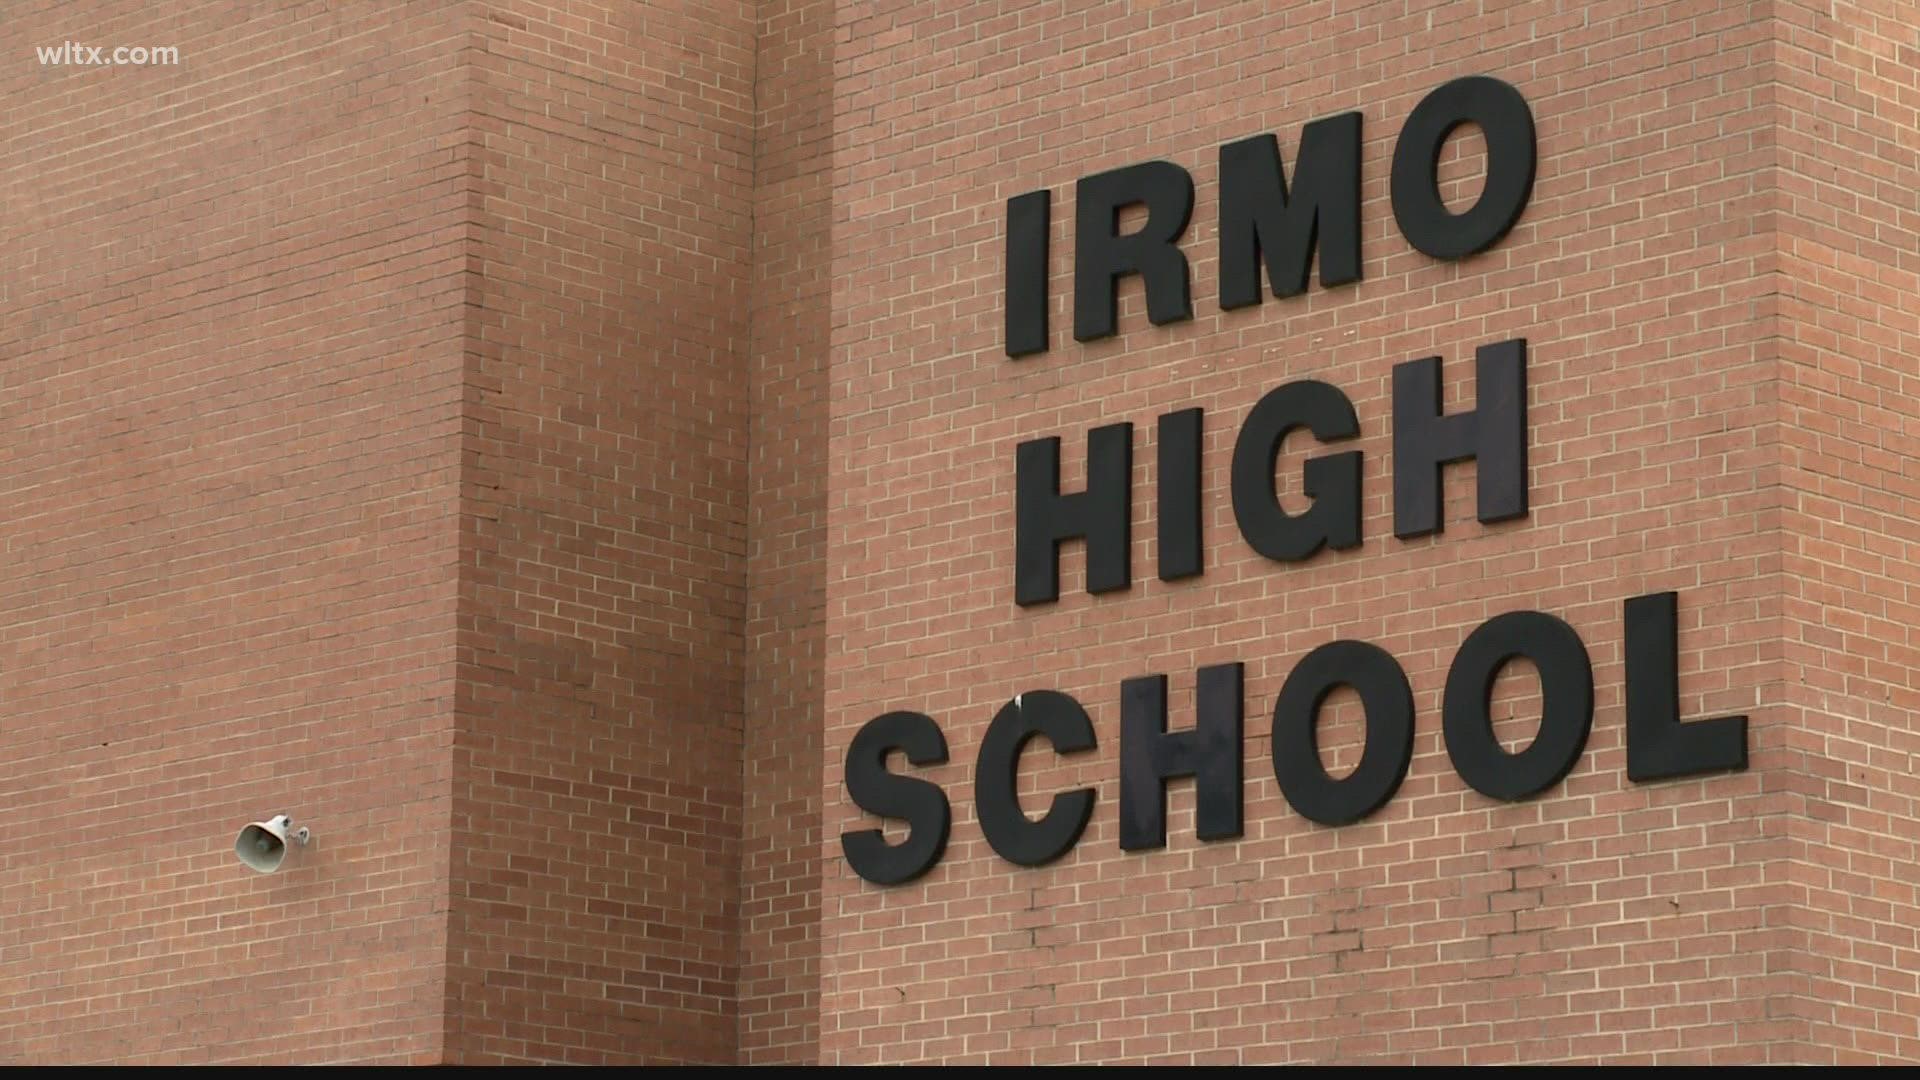 A 39-year-old construction worker suffered flash burns from an apparent electrical shock  while doing work at Irmo High School.